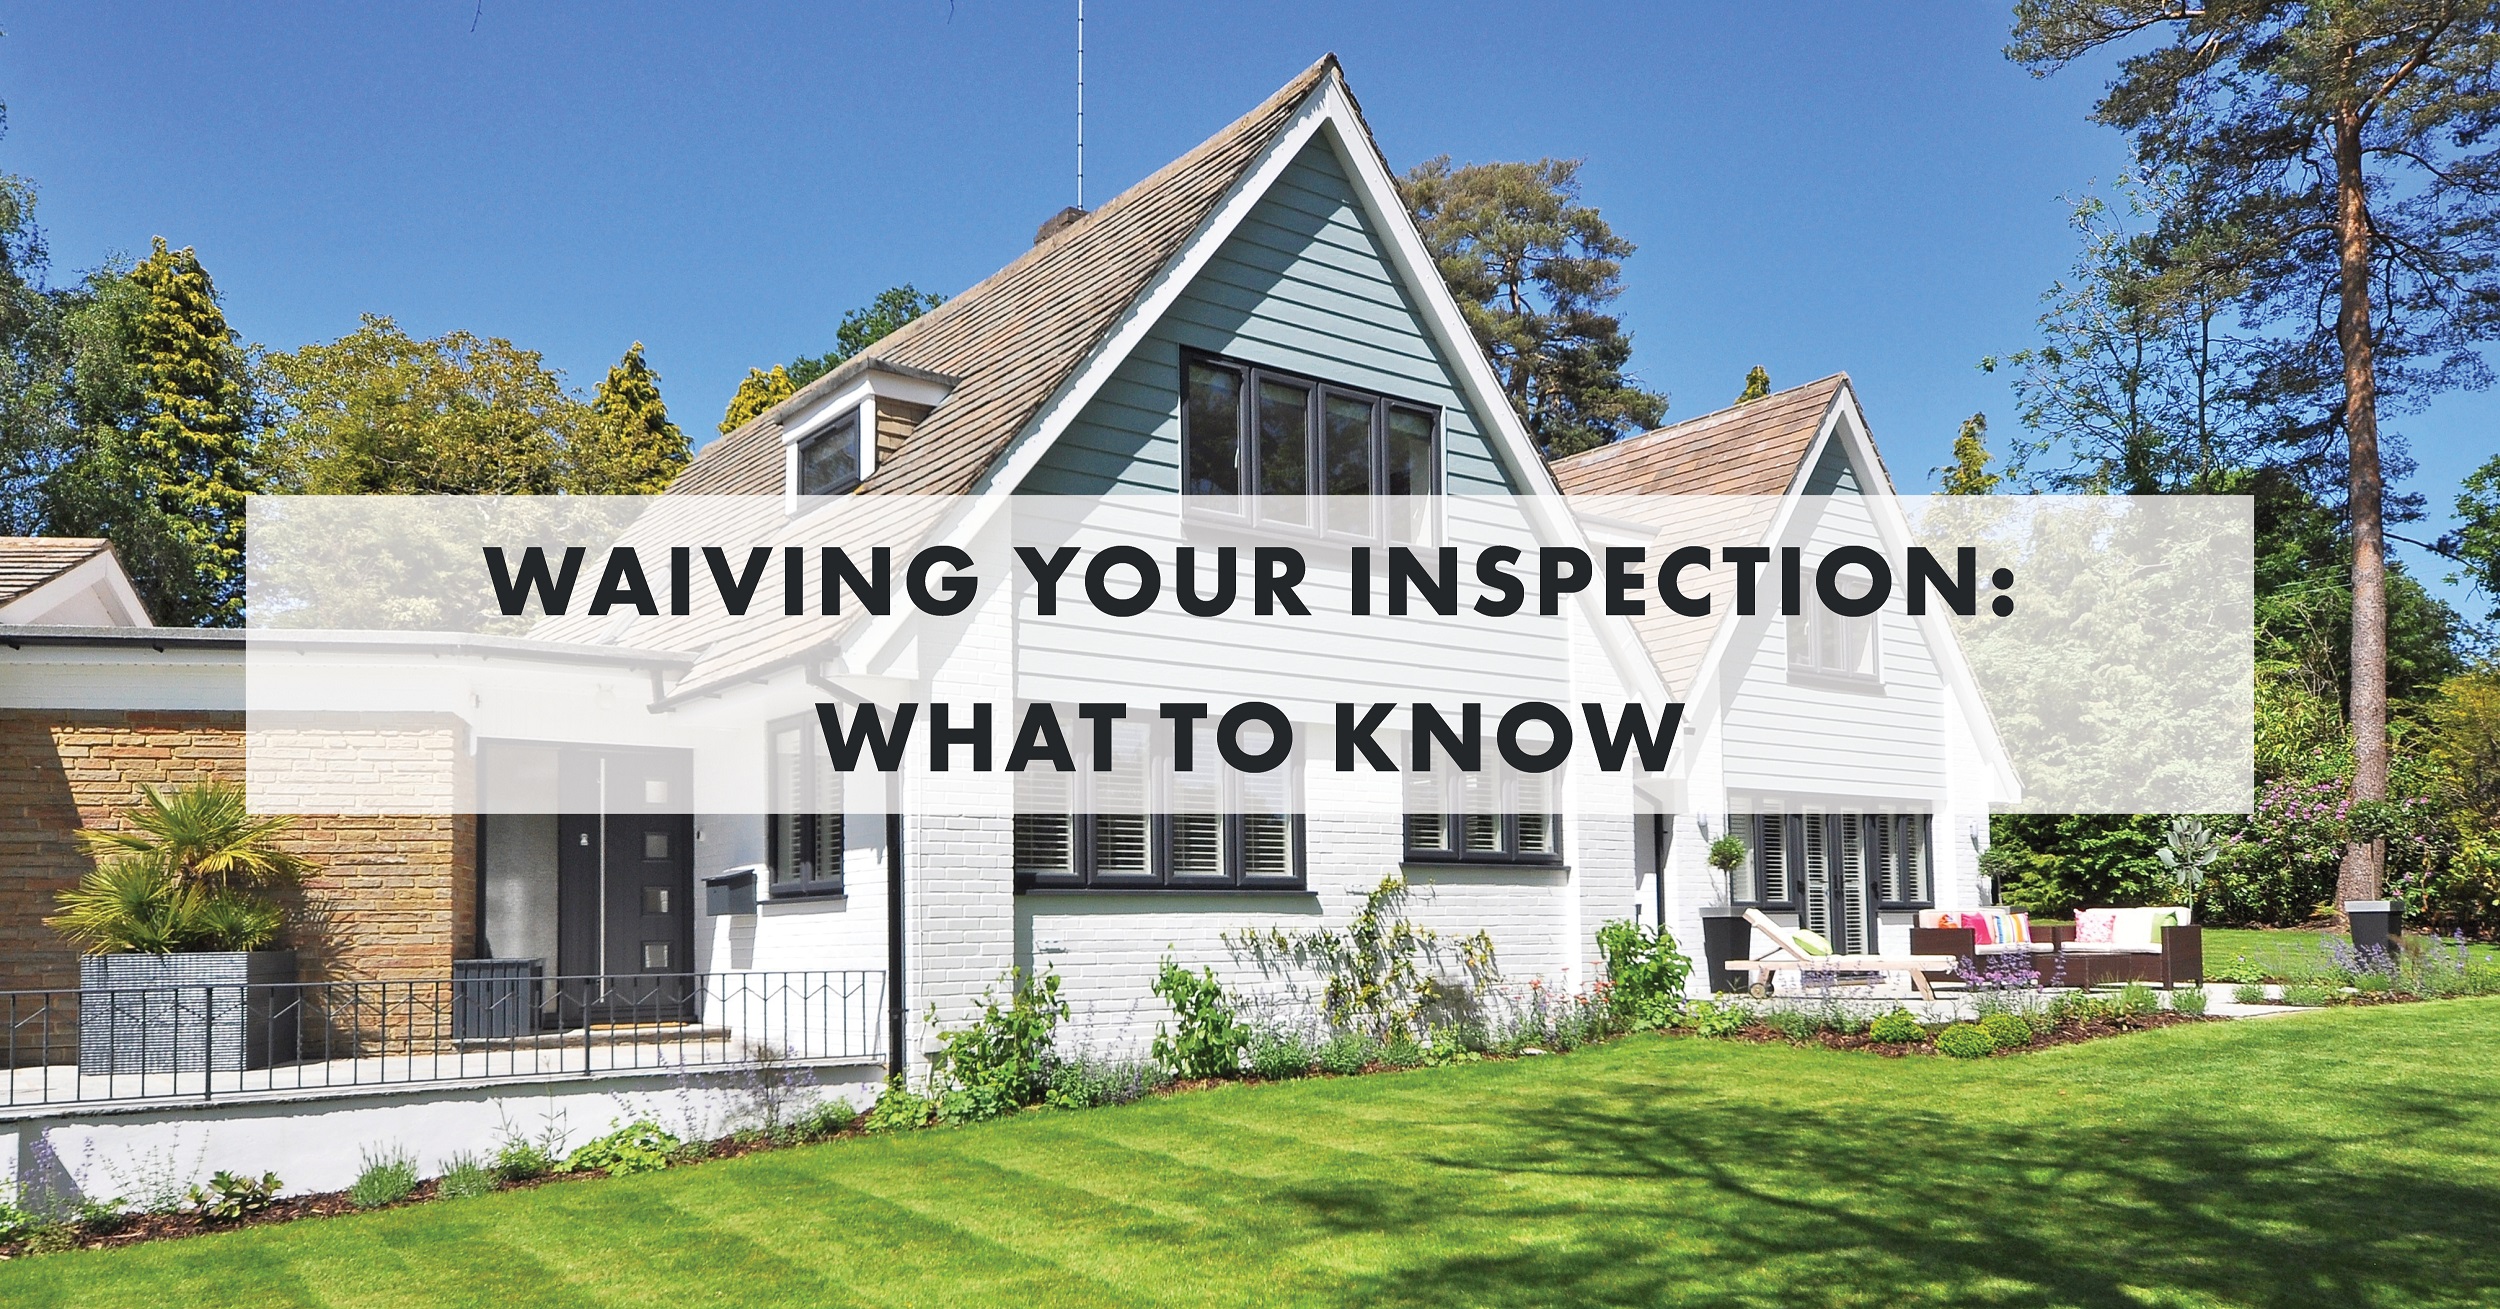 Waiving Your Inspection - What to Know